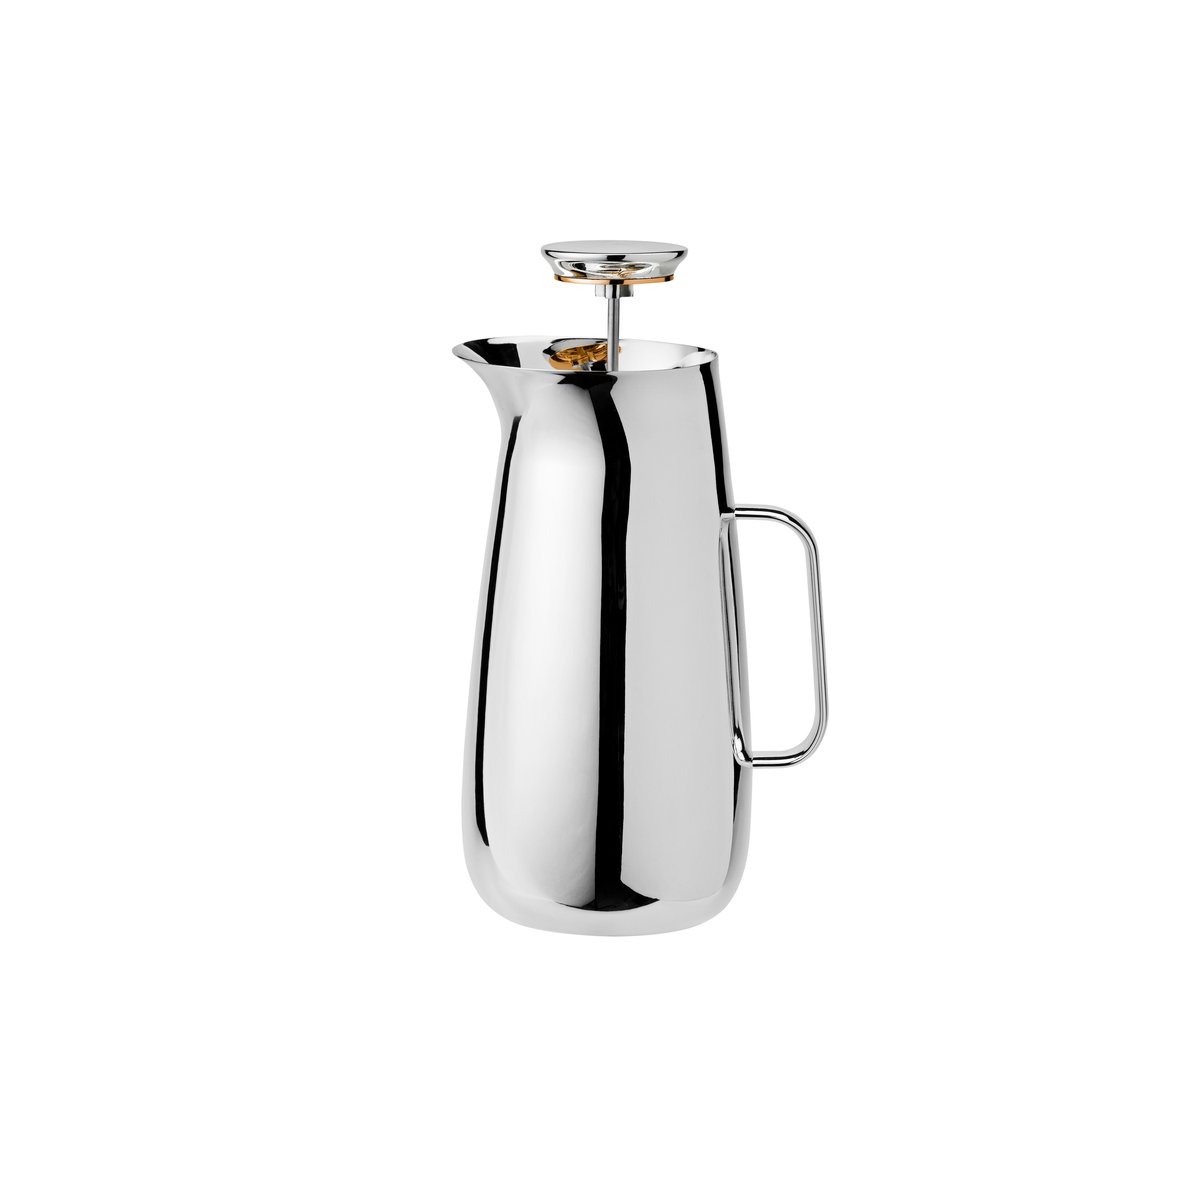 Stelton Foster cafetière thee 1 l roestvrij staal